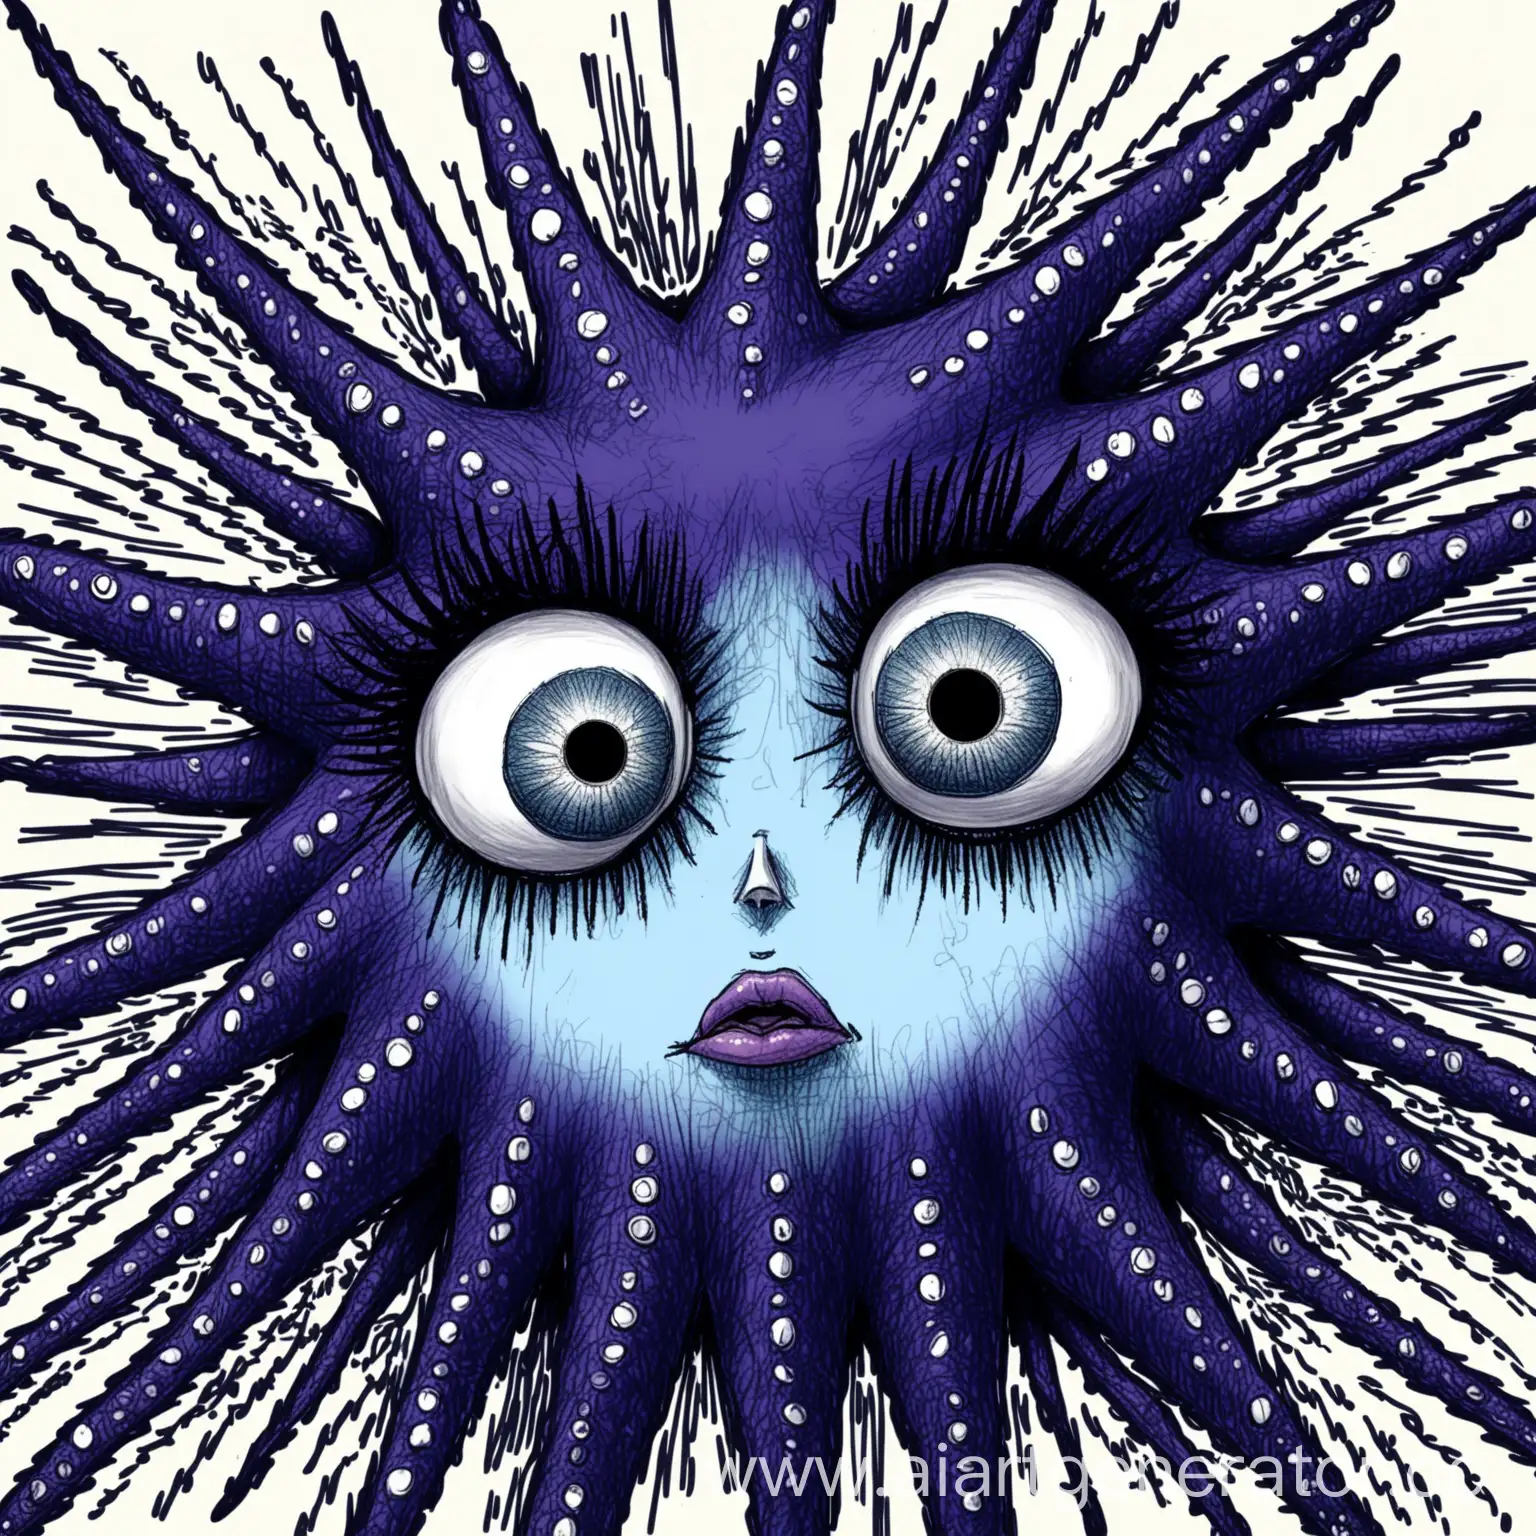 Sketch-Style-Sad-Sea-Star-with-Enormous-Eyelashes-and-Dark-Circles